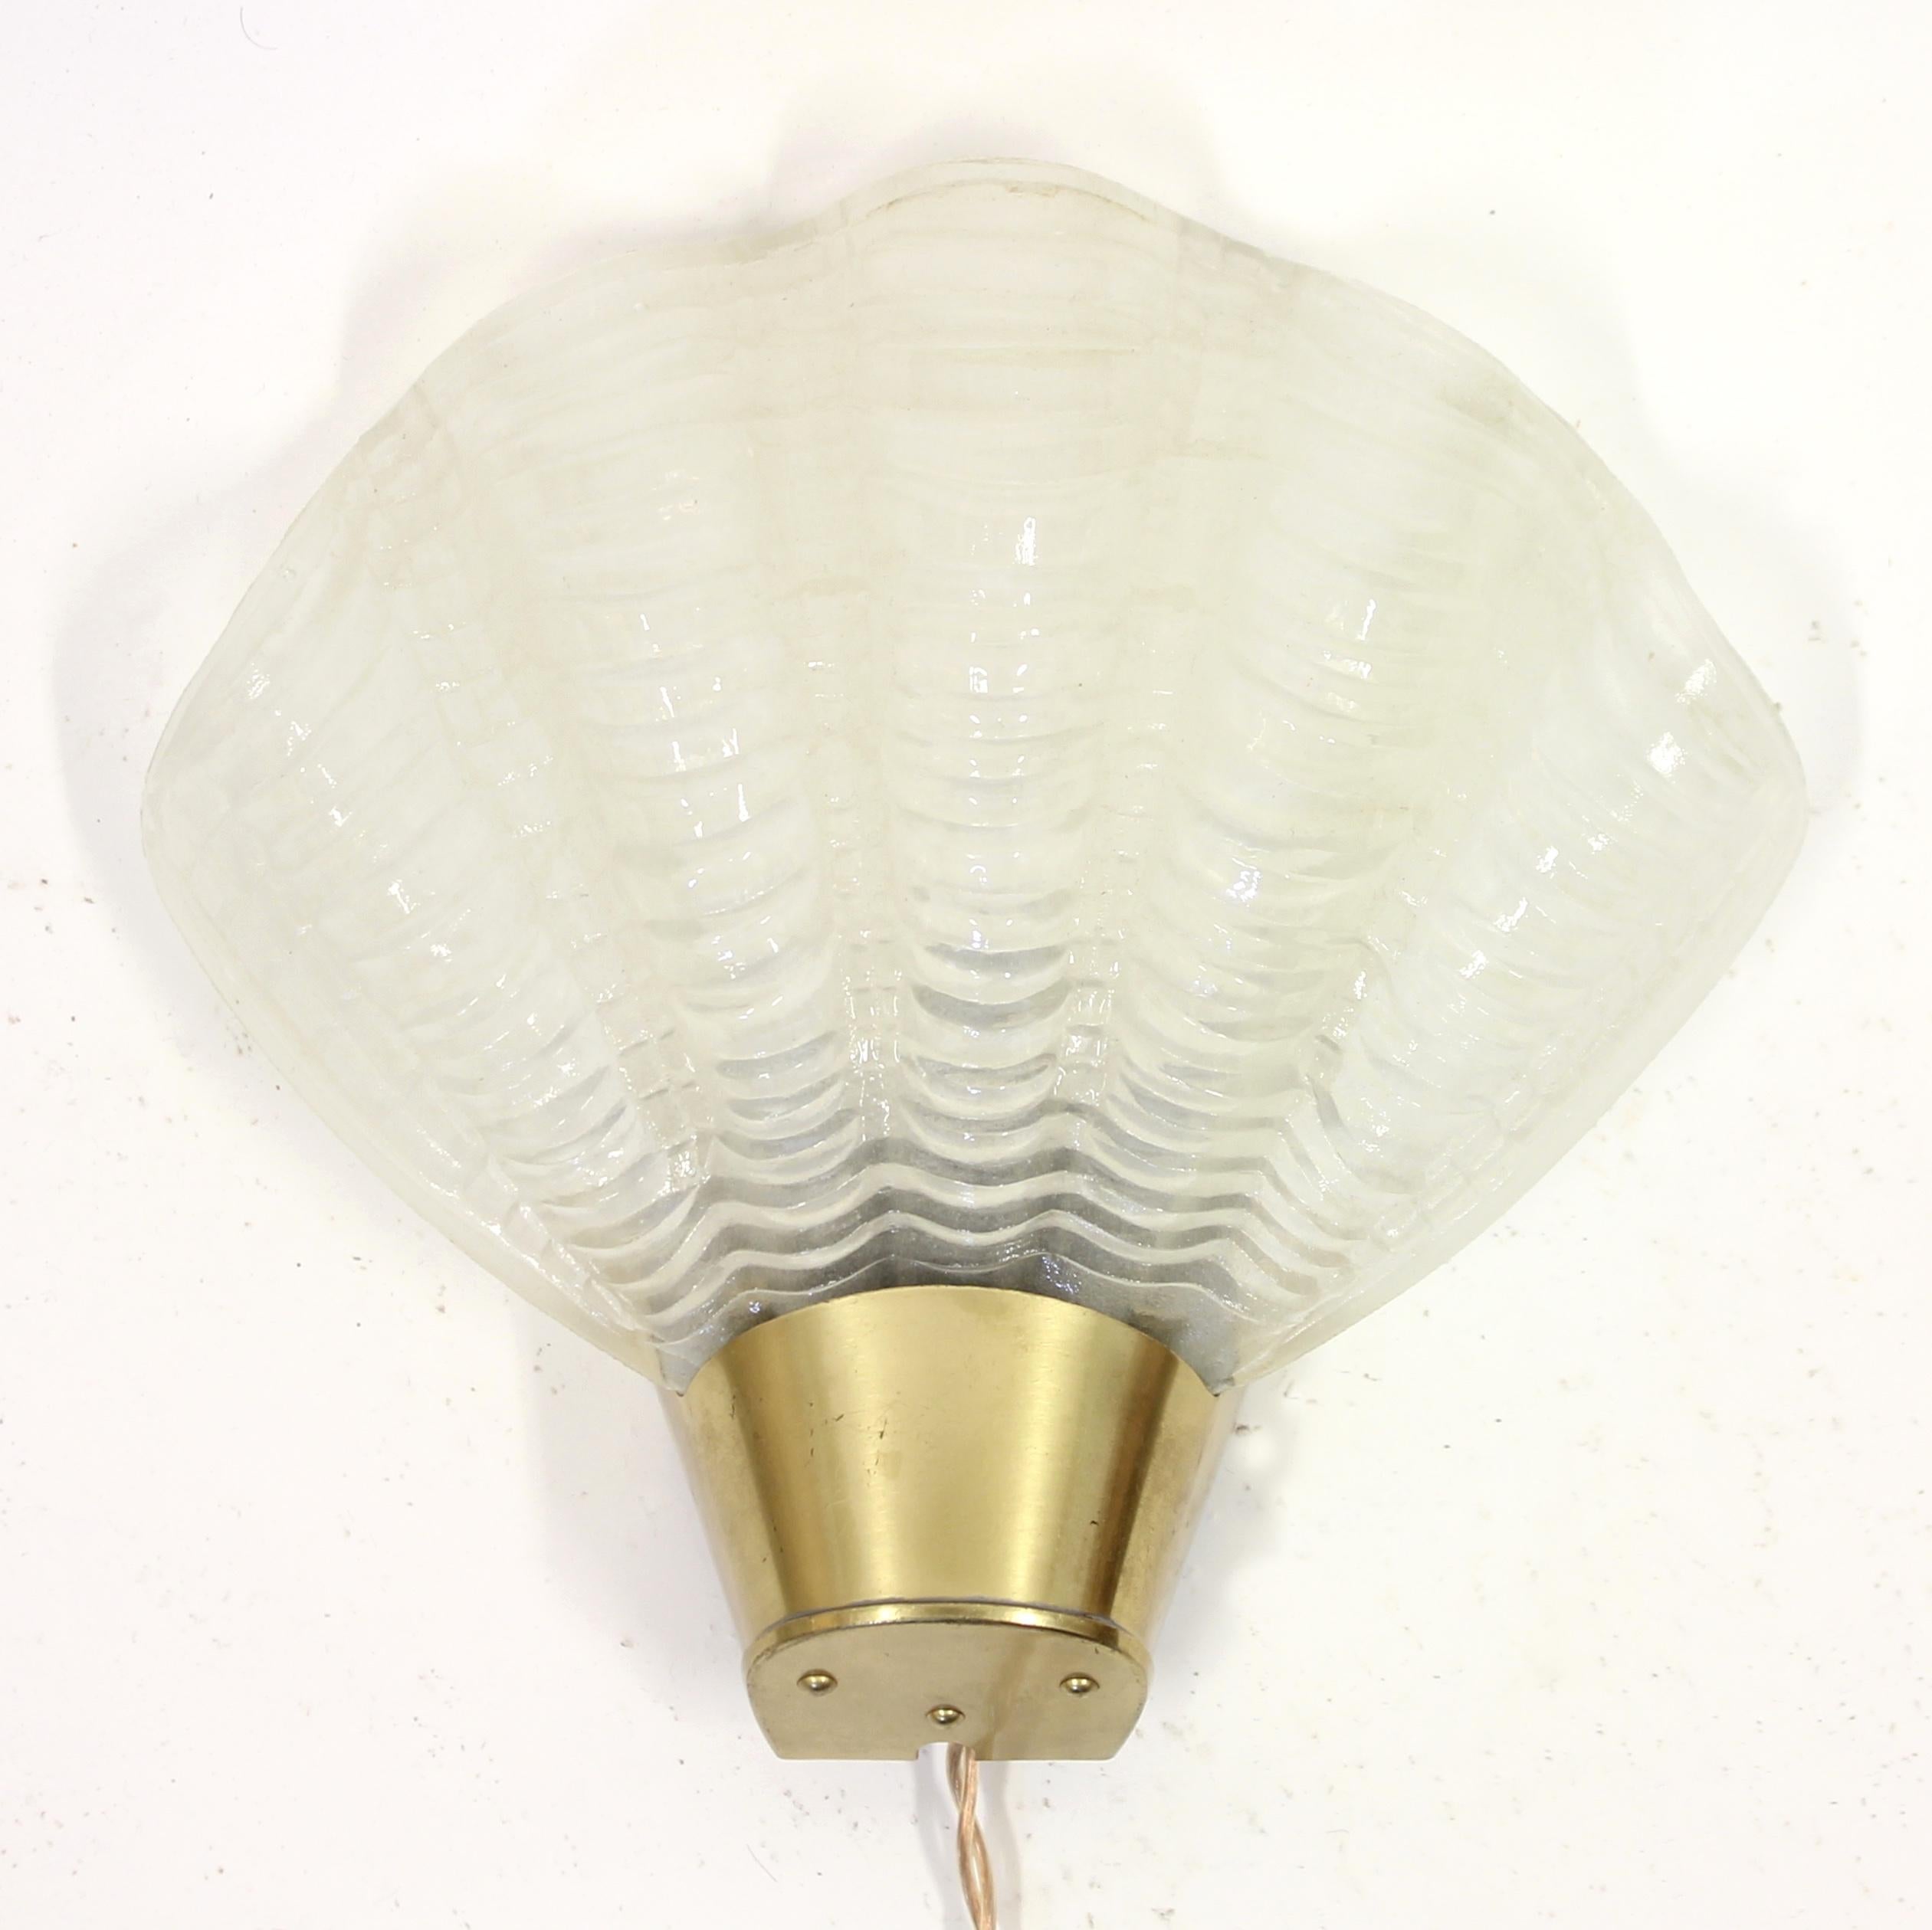 Mid-century shell shaped wall scone / wall lamp made by Swedish manufacturer ASEA in the 1950s. Bottom part made of brass, mounted with a glass shade in form of a shell. Overall good vintage condition with light ware consistent with age and use.